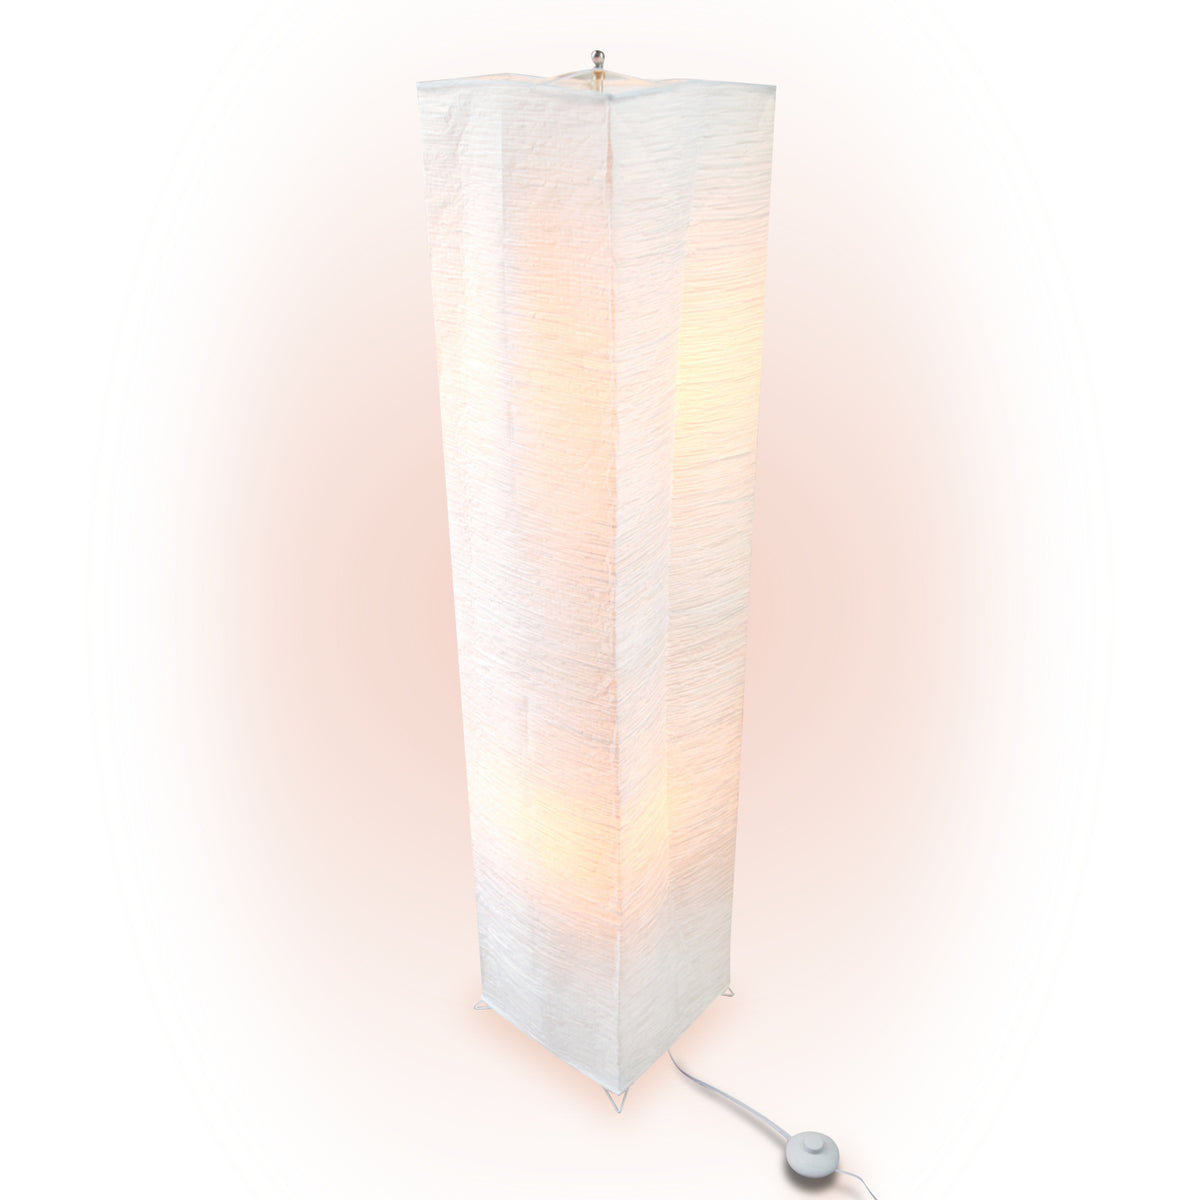 Hako Crepe Paper Floor Lamp with Foot Switch, 4-FT Tall, 10-inch x 48-inch